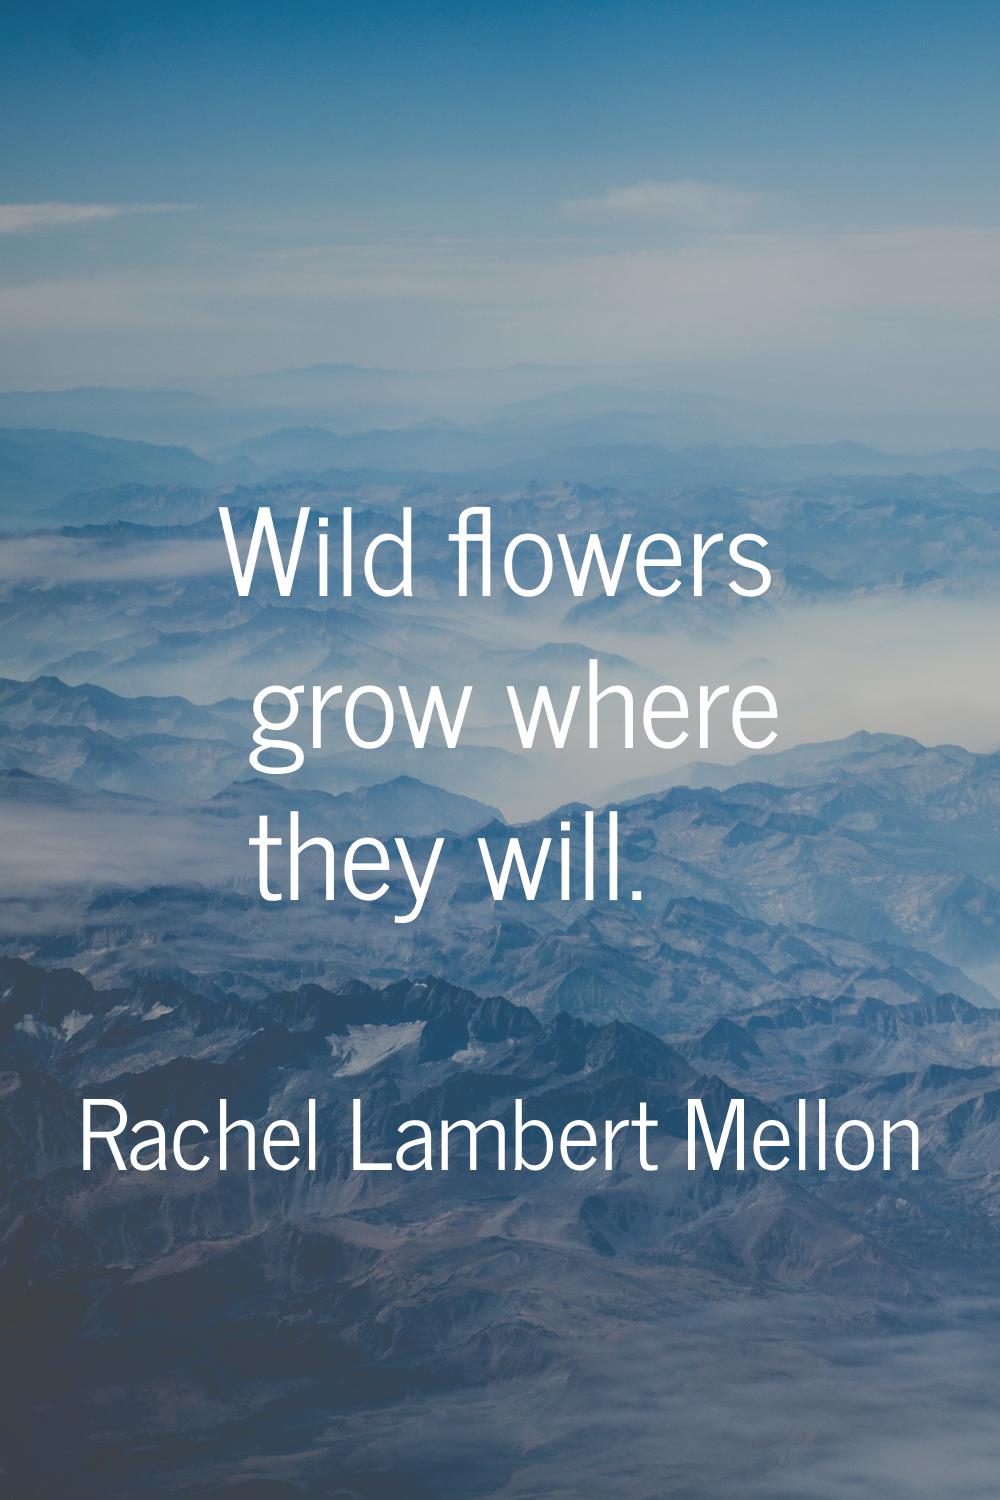 Wild flowers grow where they will.